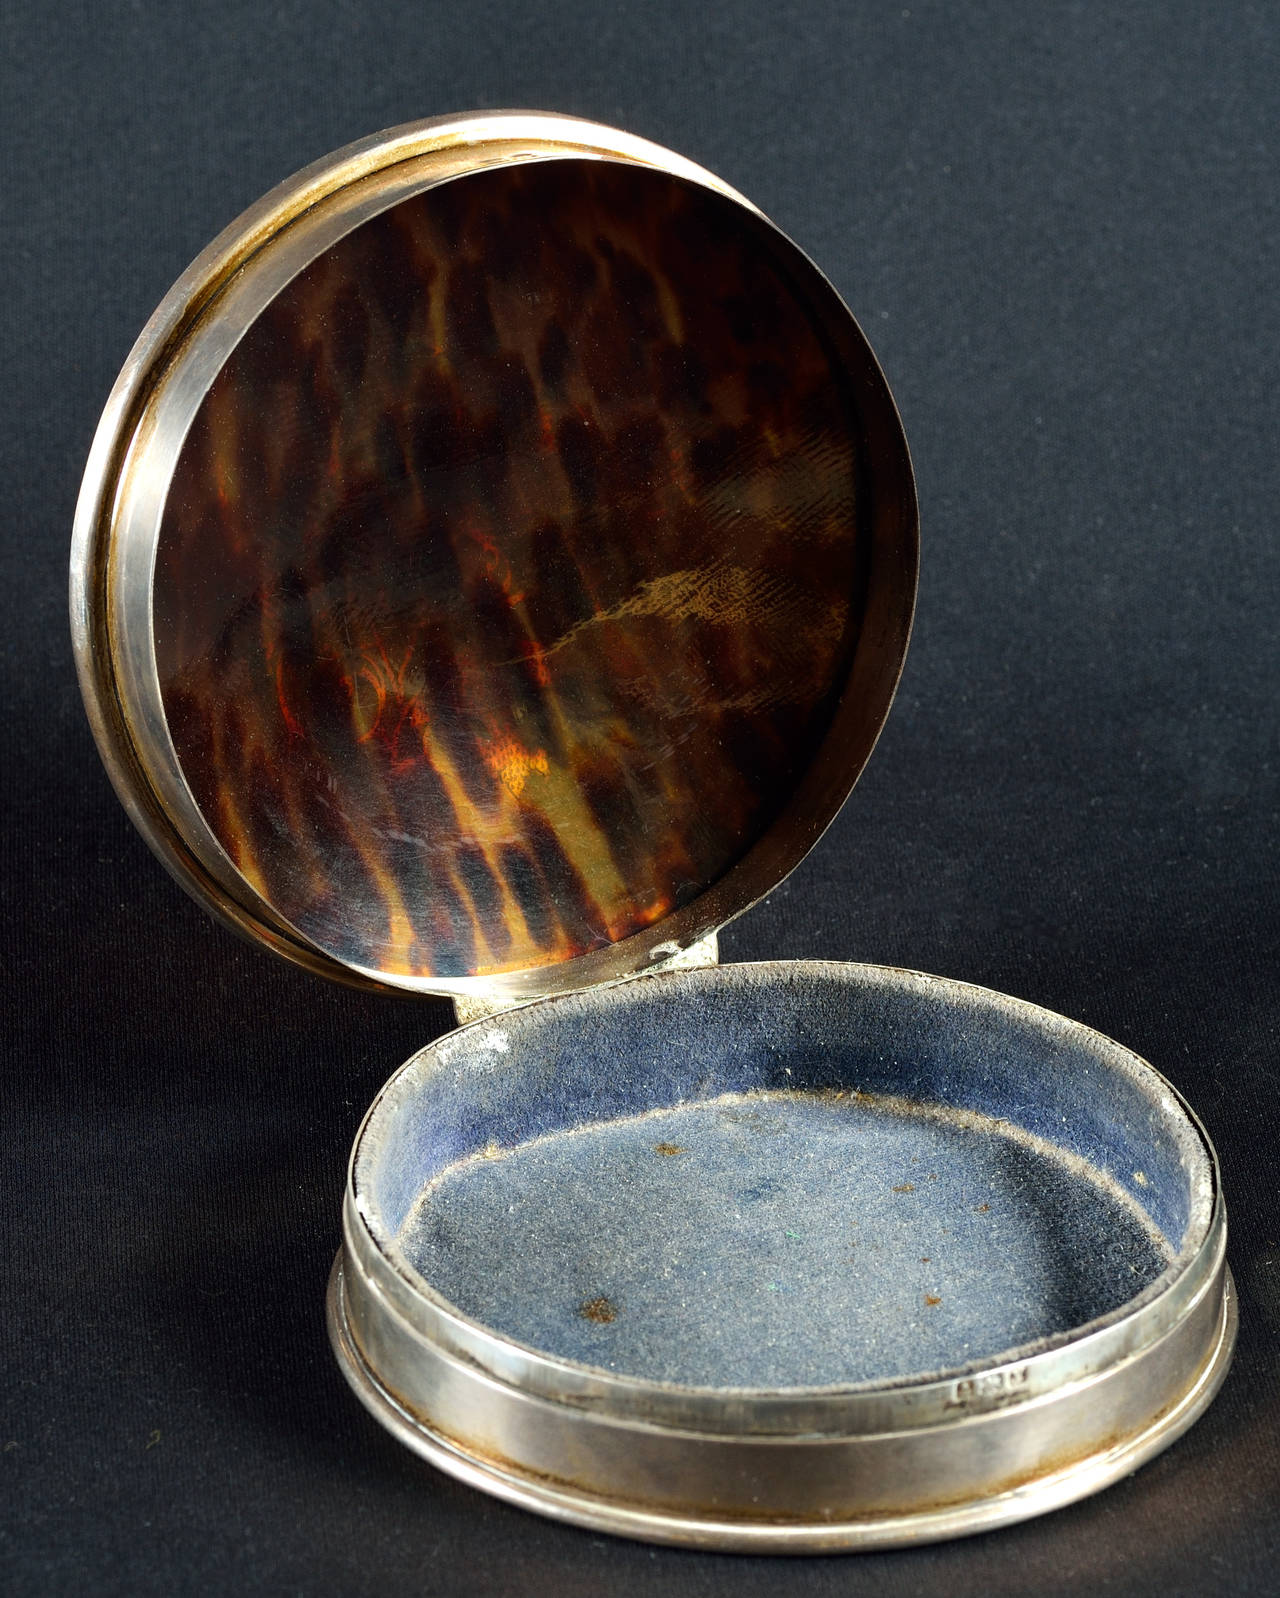 Sterling silver and tortoiseshell jewellery box.
Circular shape and hinged cover inset with tortoiseshell plaque inlaid with silver ornaments.
Velvet lined interior.
Fully hallmarked.
England, Birmingham, 1920.
Diameter 10.8 cm (4